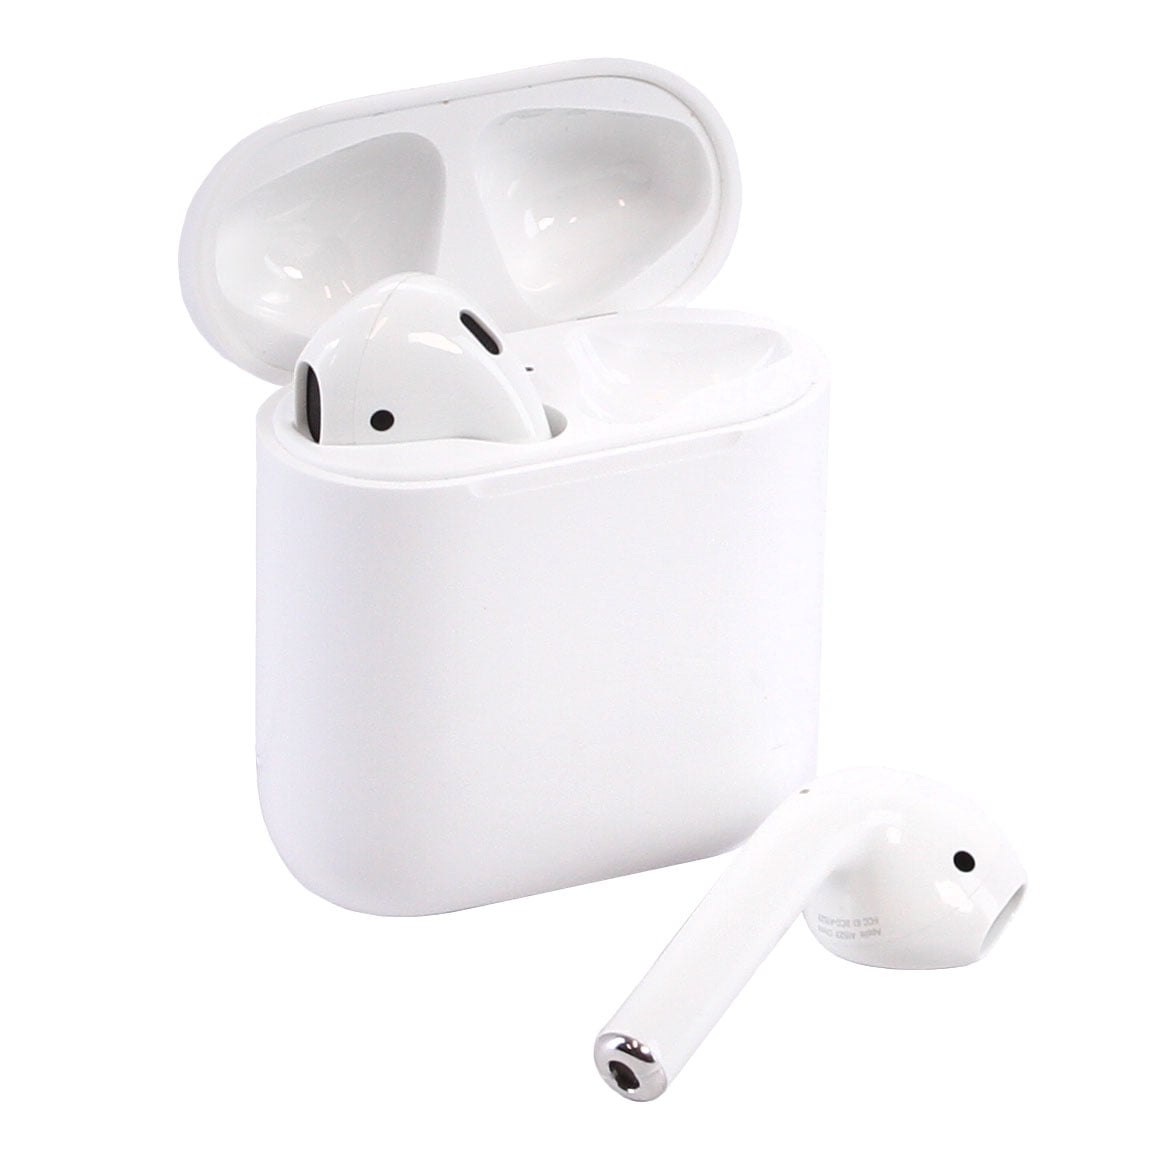 Refurbished Apple AirPods 2 with Wireless Charging Case MRXJ2AM/A